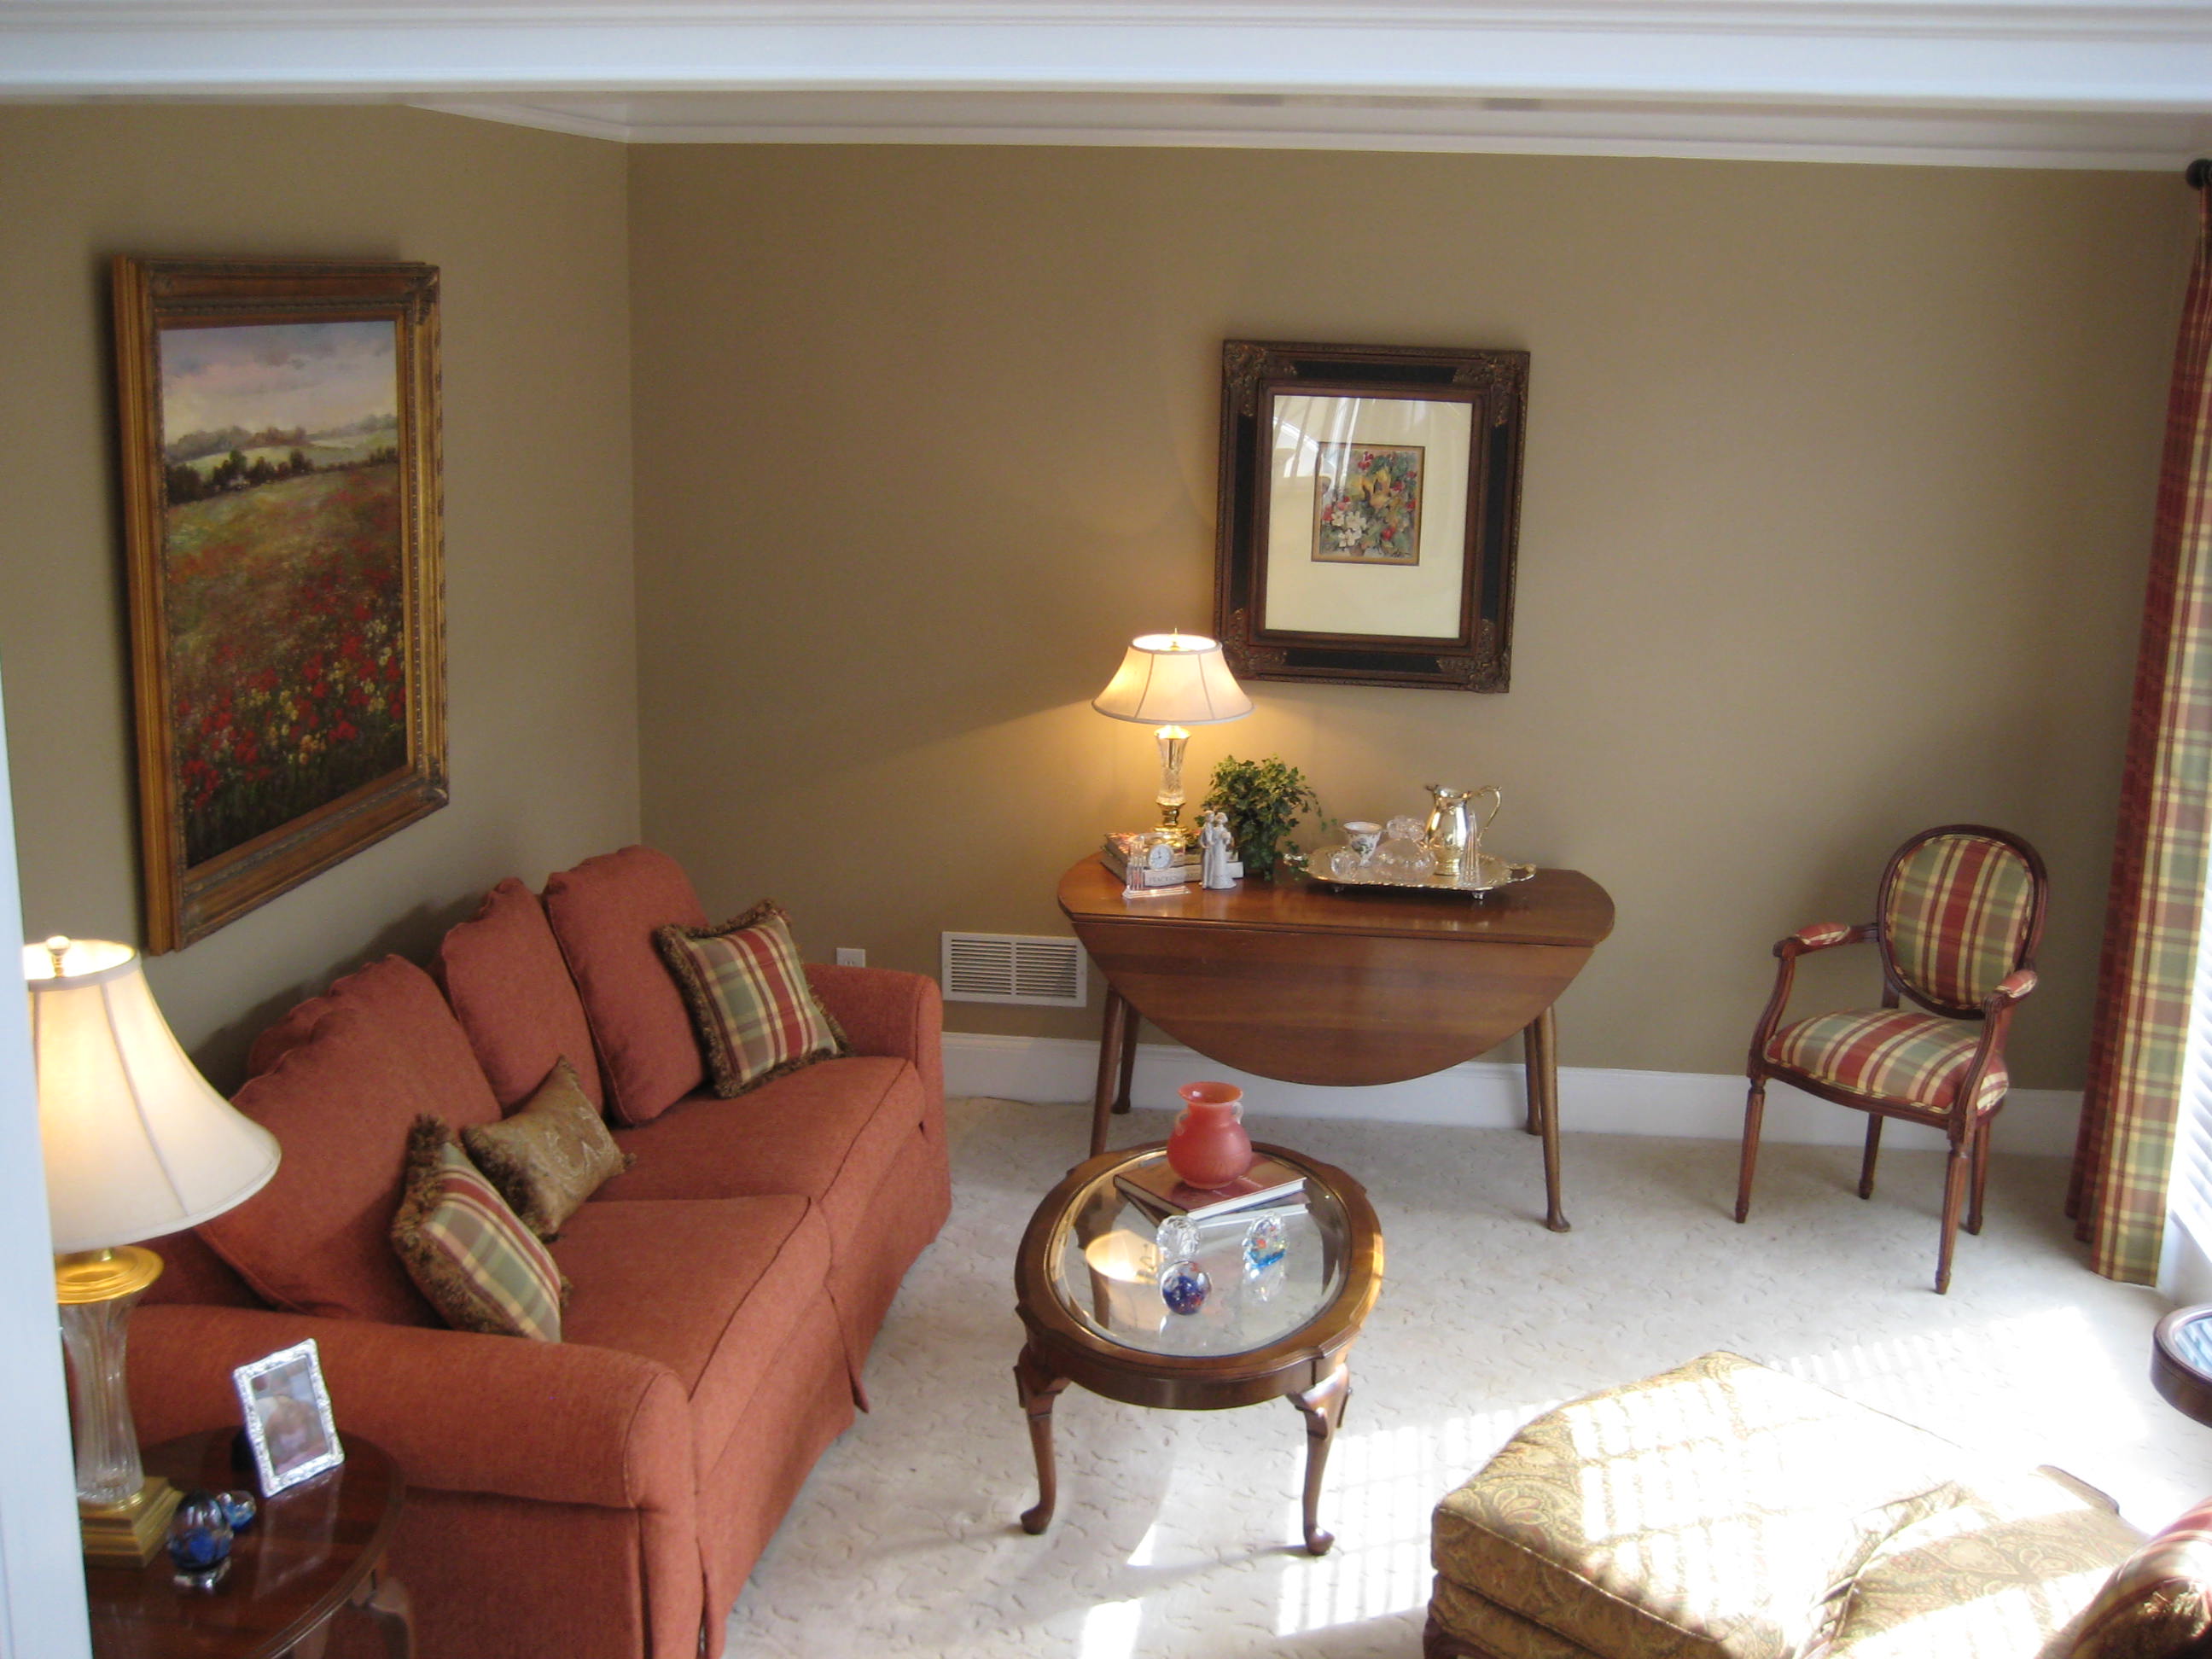 Living Rm. Make over. Upholstery, Window Treatments, etc.